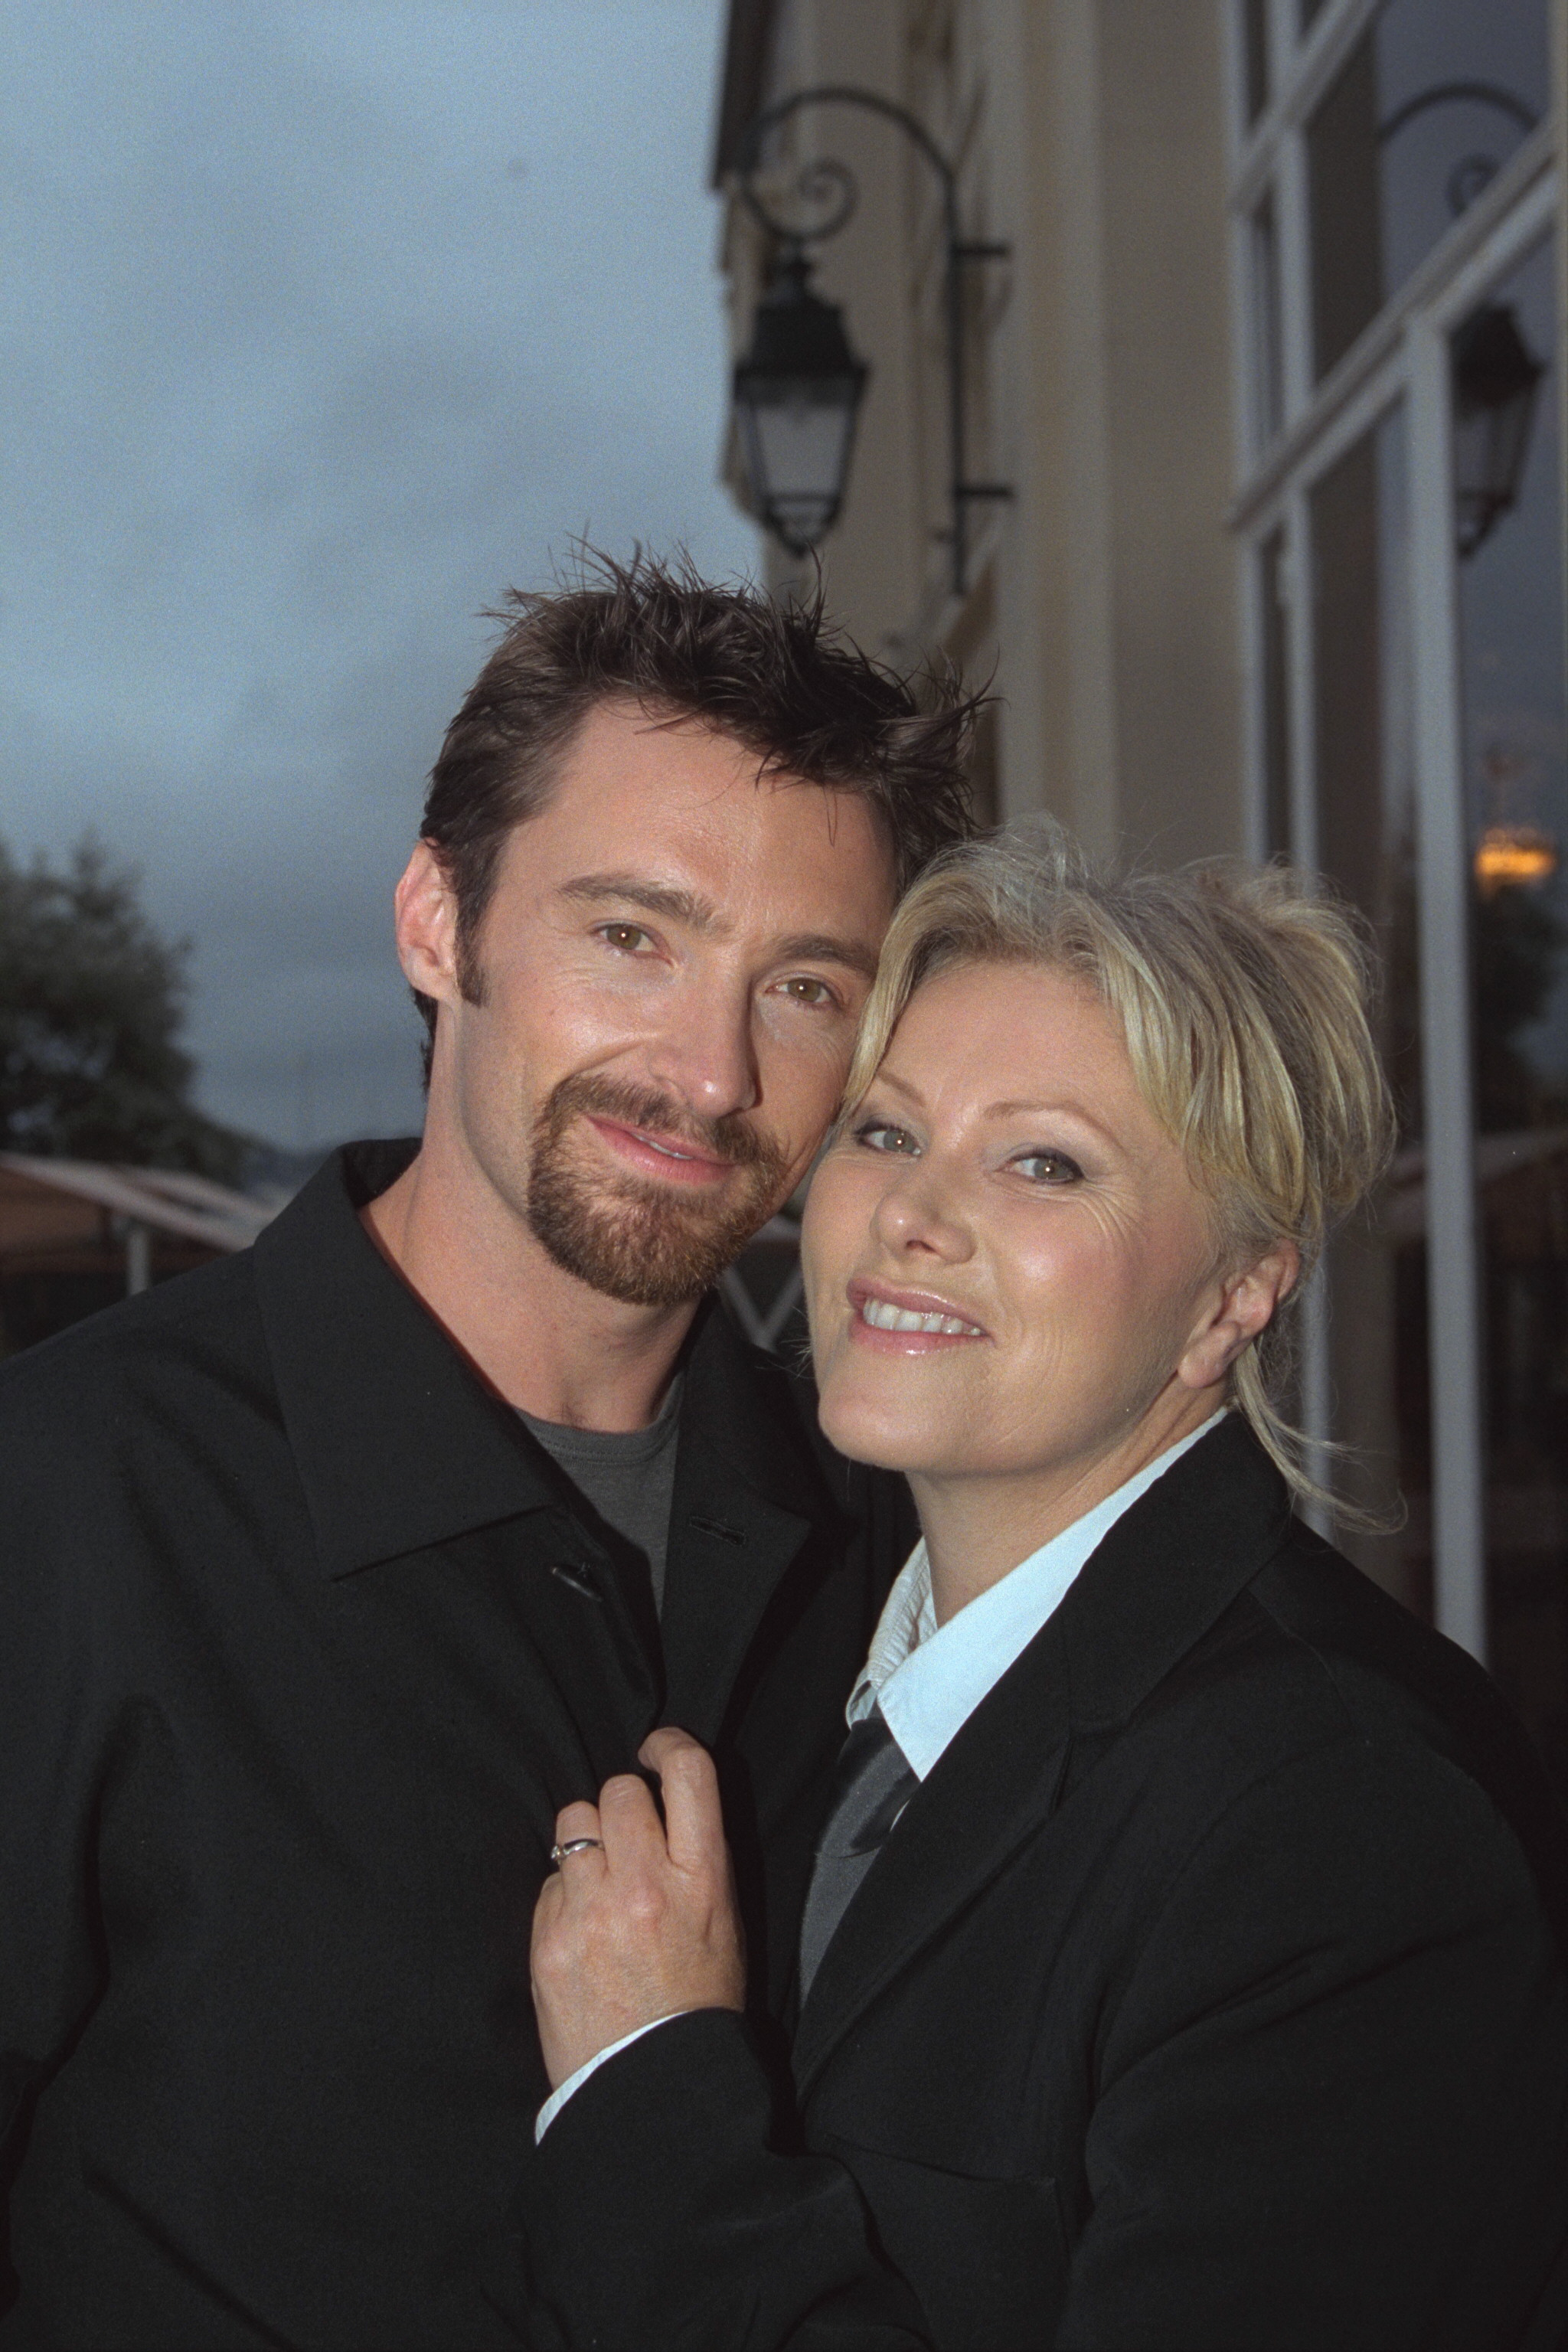 Hugh Jackman and Deborra-Lee Furness at the Deauville Festival in 2001 | Source: Getty Images